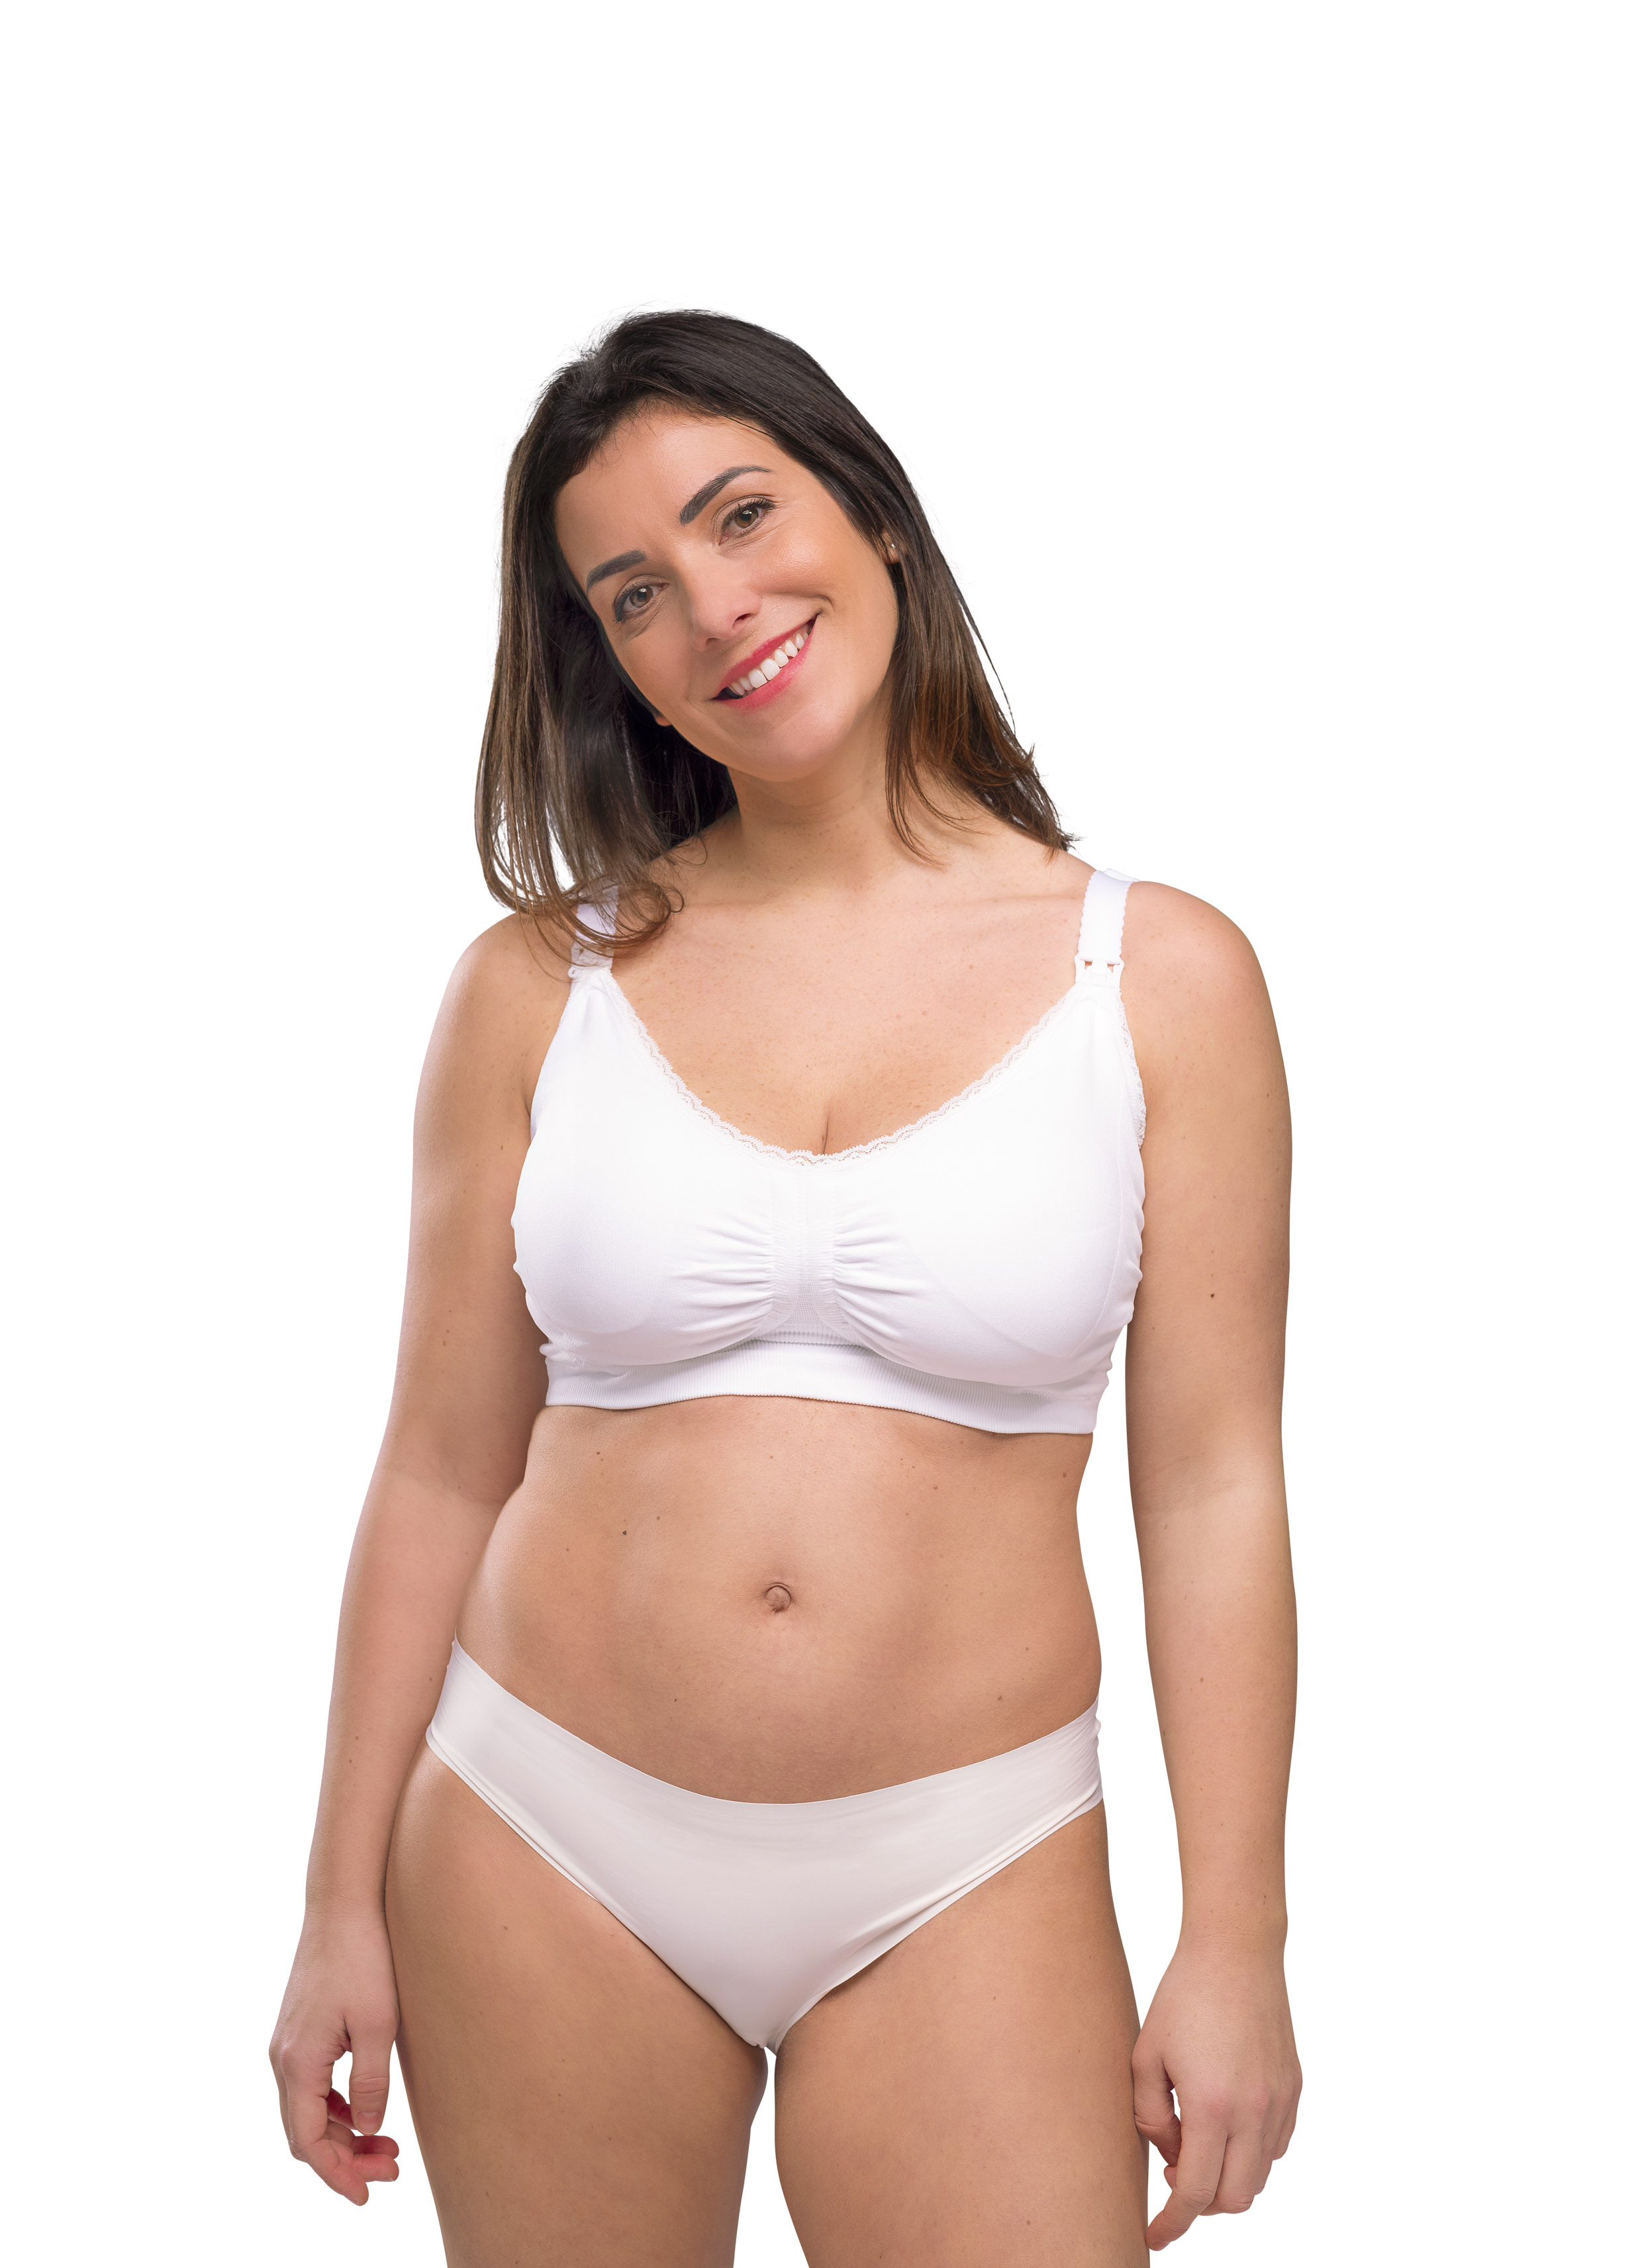 Carriwell White Seamless Post Birth Shape Wear Panty £11.99 - Carriwell  Nursing Bras Free UK Delivery